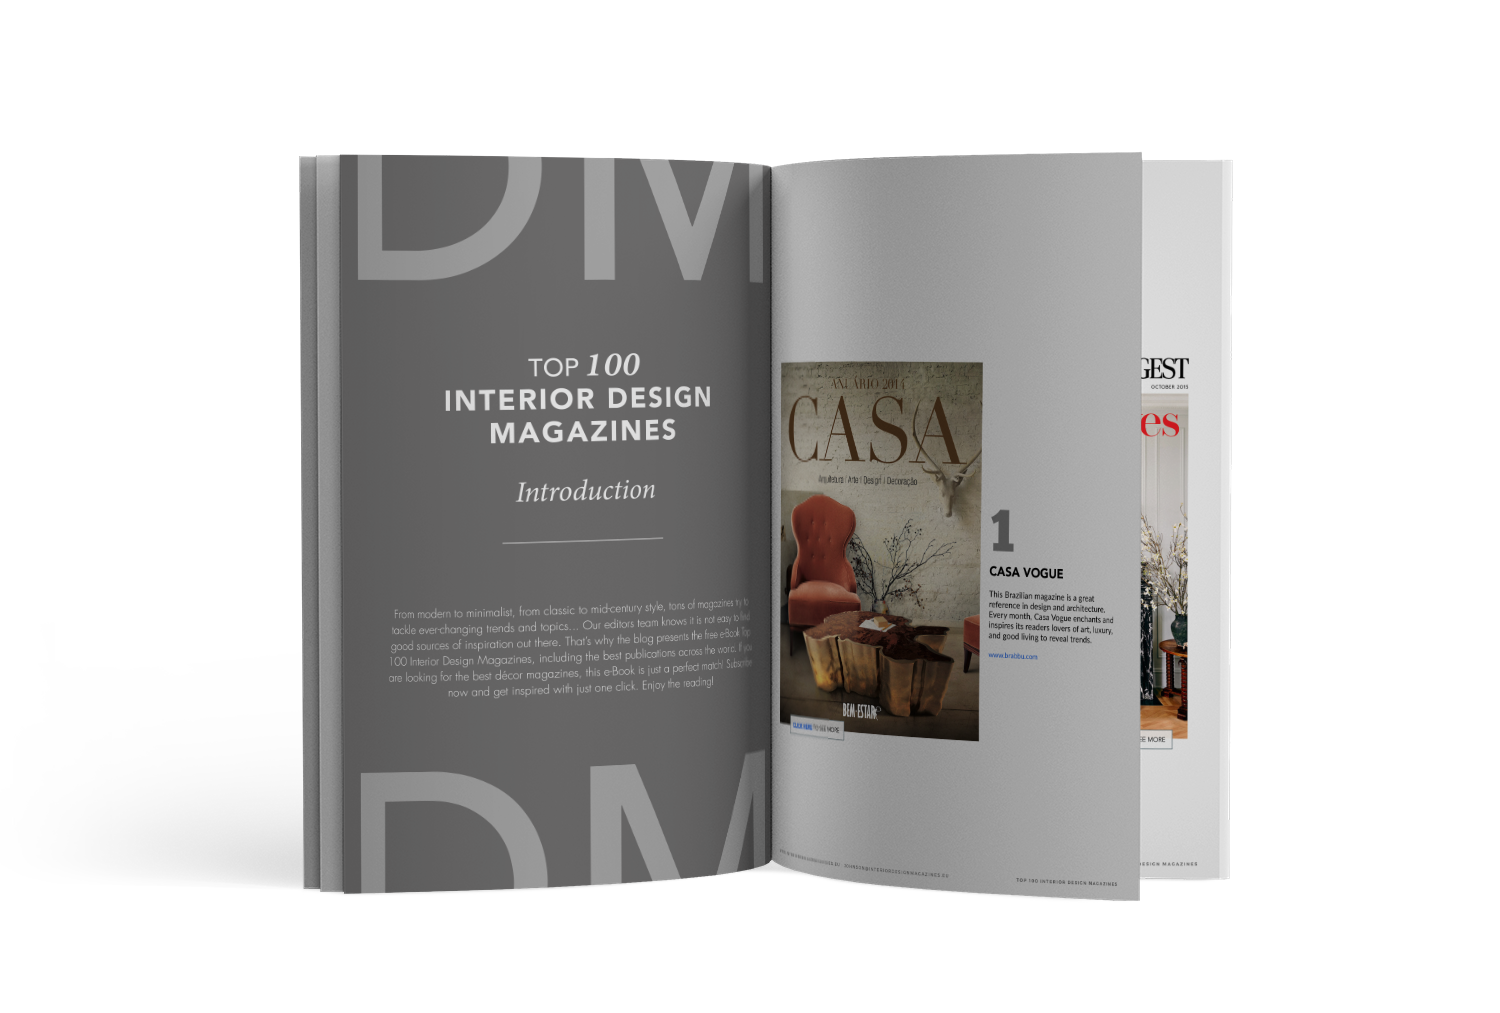 Download Free eBooks and Discover the Best Interior Design Ideas Ever ➤ To see more news about the Interior Design Magazines in the world visit us at www.interiordesignmagazines.eu #interiordesignmagazines #designmagazines #interiordesign @imagazines